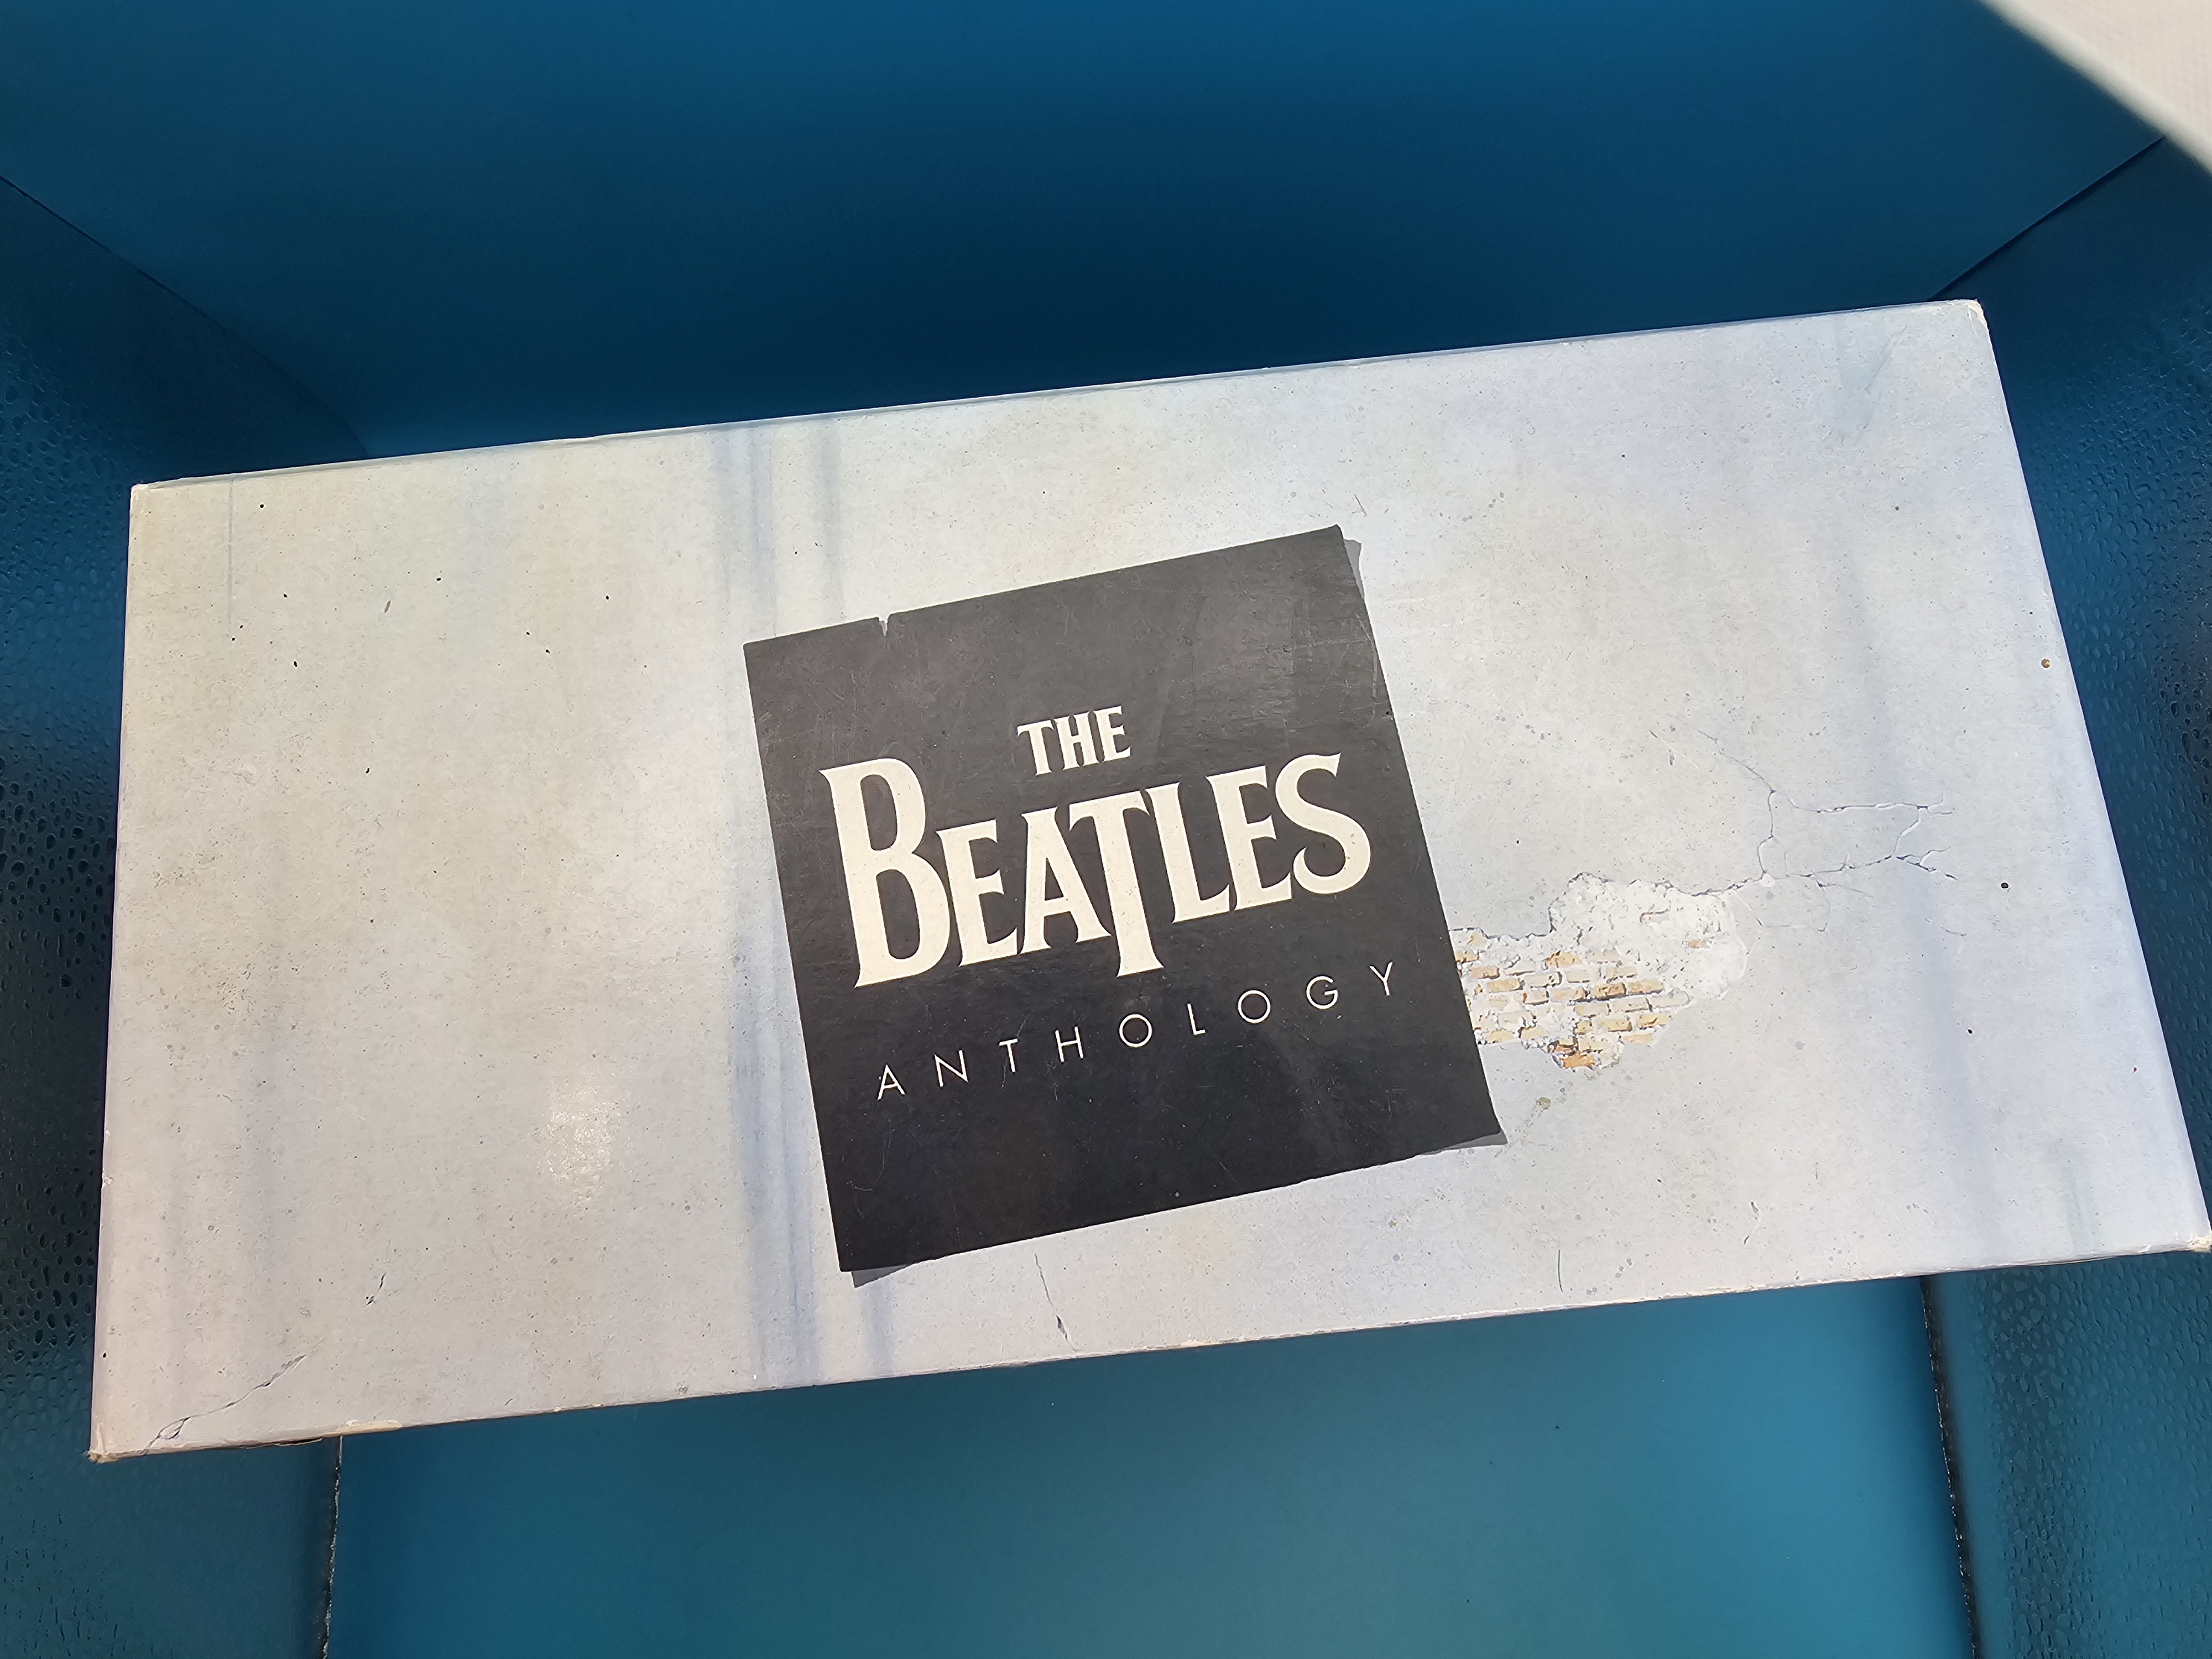 The Beatles Anthology 8 Video Box Set in mint condition - Image 2 of 7